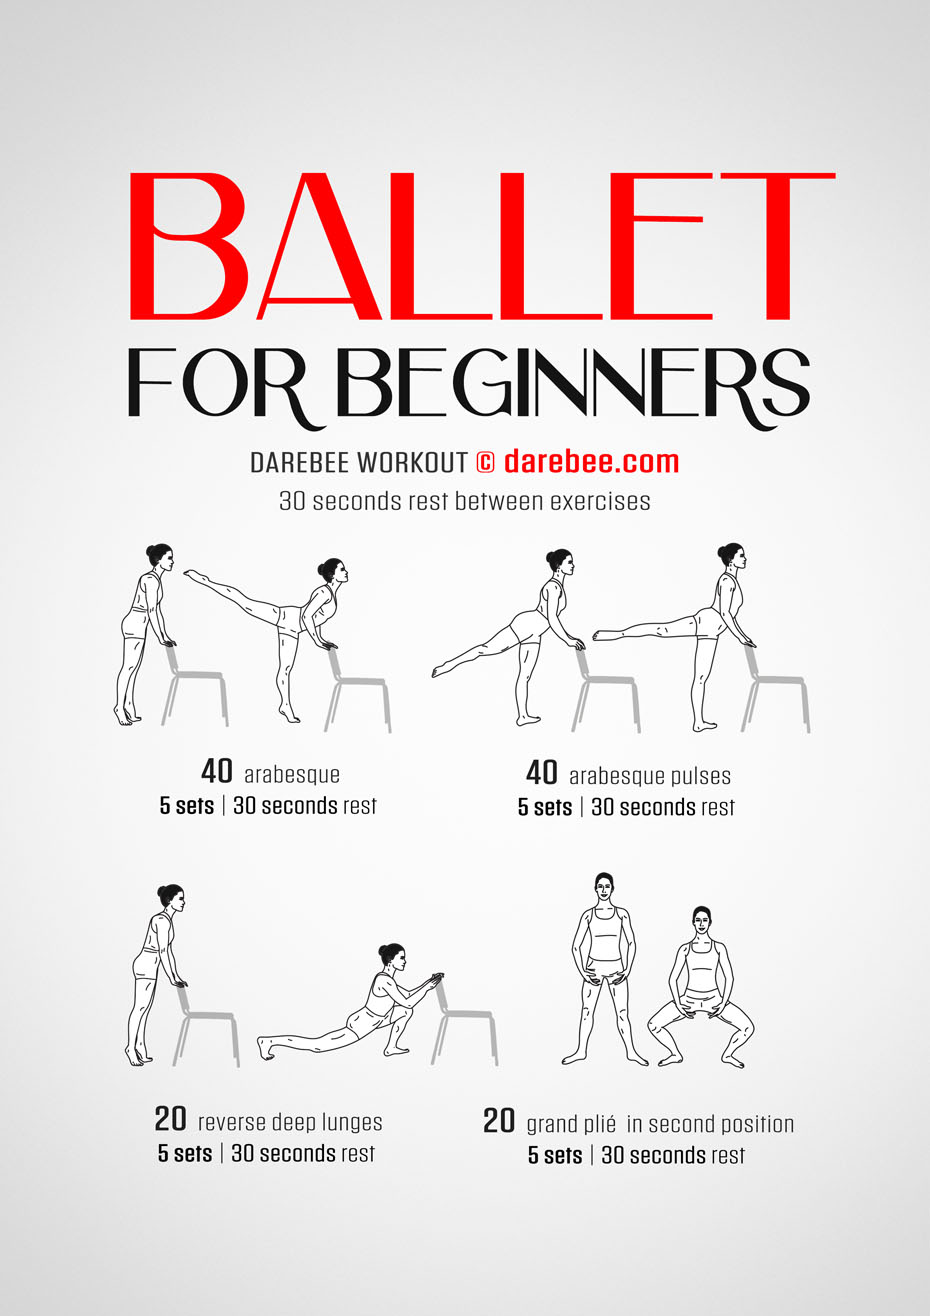 Ballet For Beginners is a Darebee home-fitness, ballet-based no-equipment workout you can do at home.